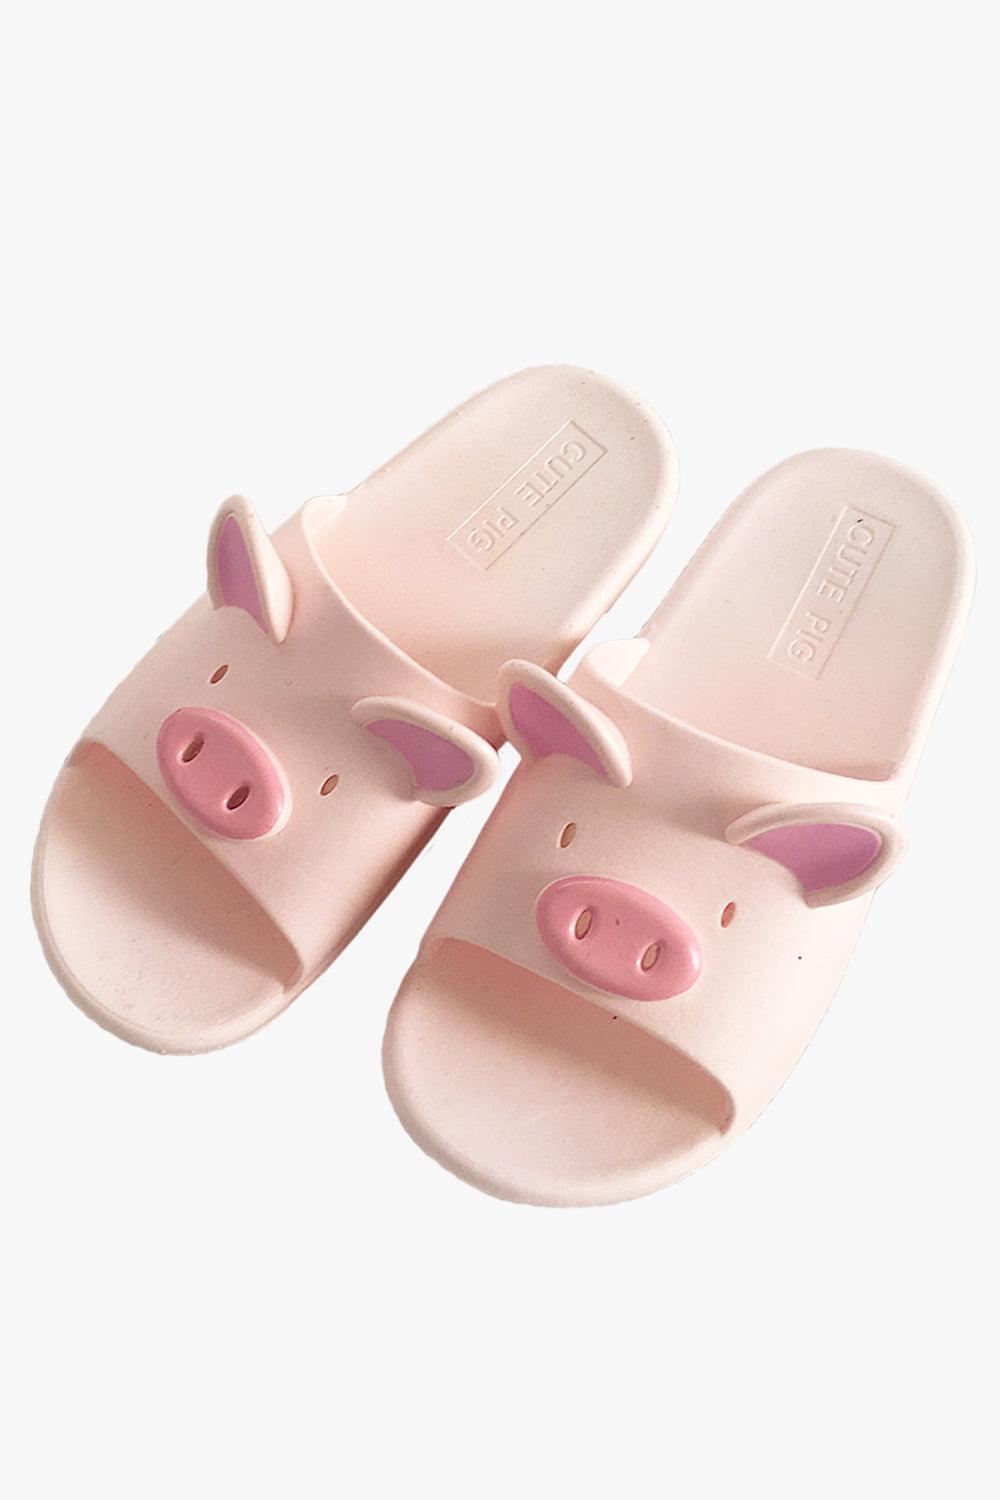 Cute Pink Pig Slides Softie Aesthetic - Aesthetic Clothes Shop